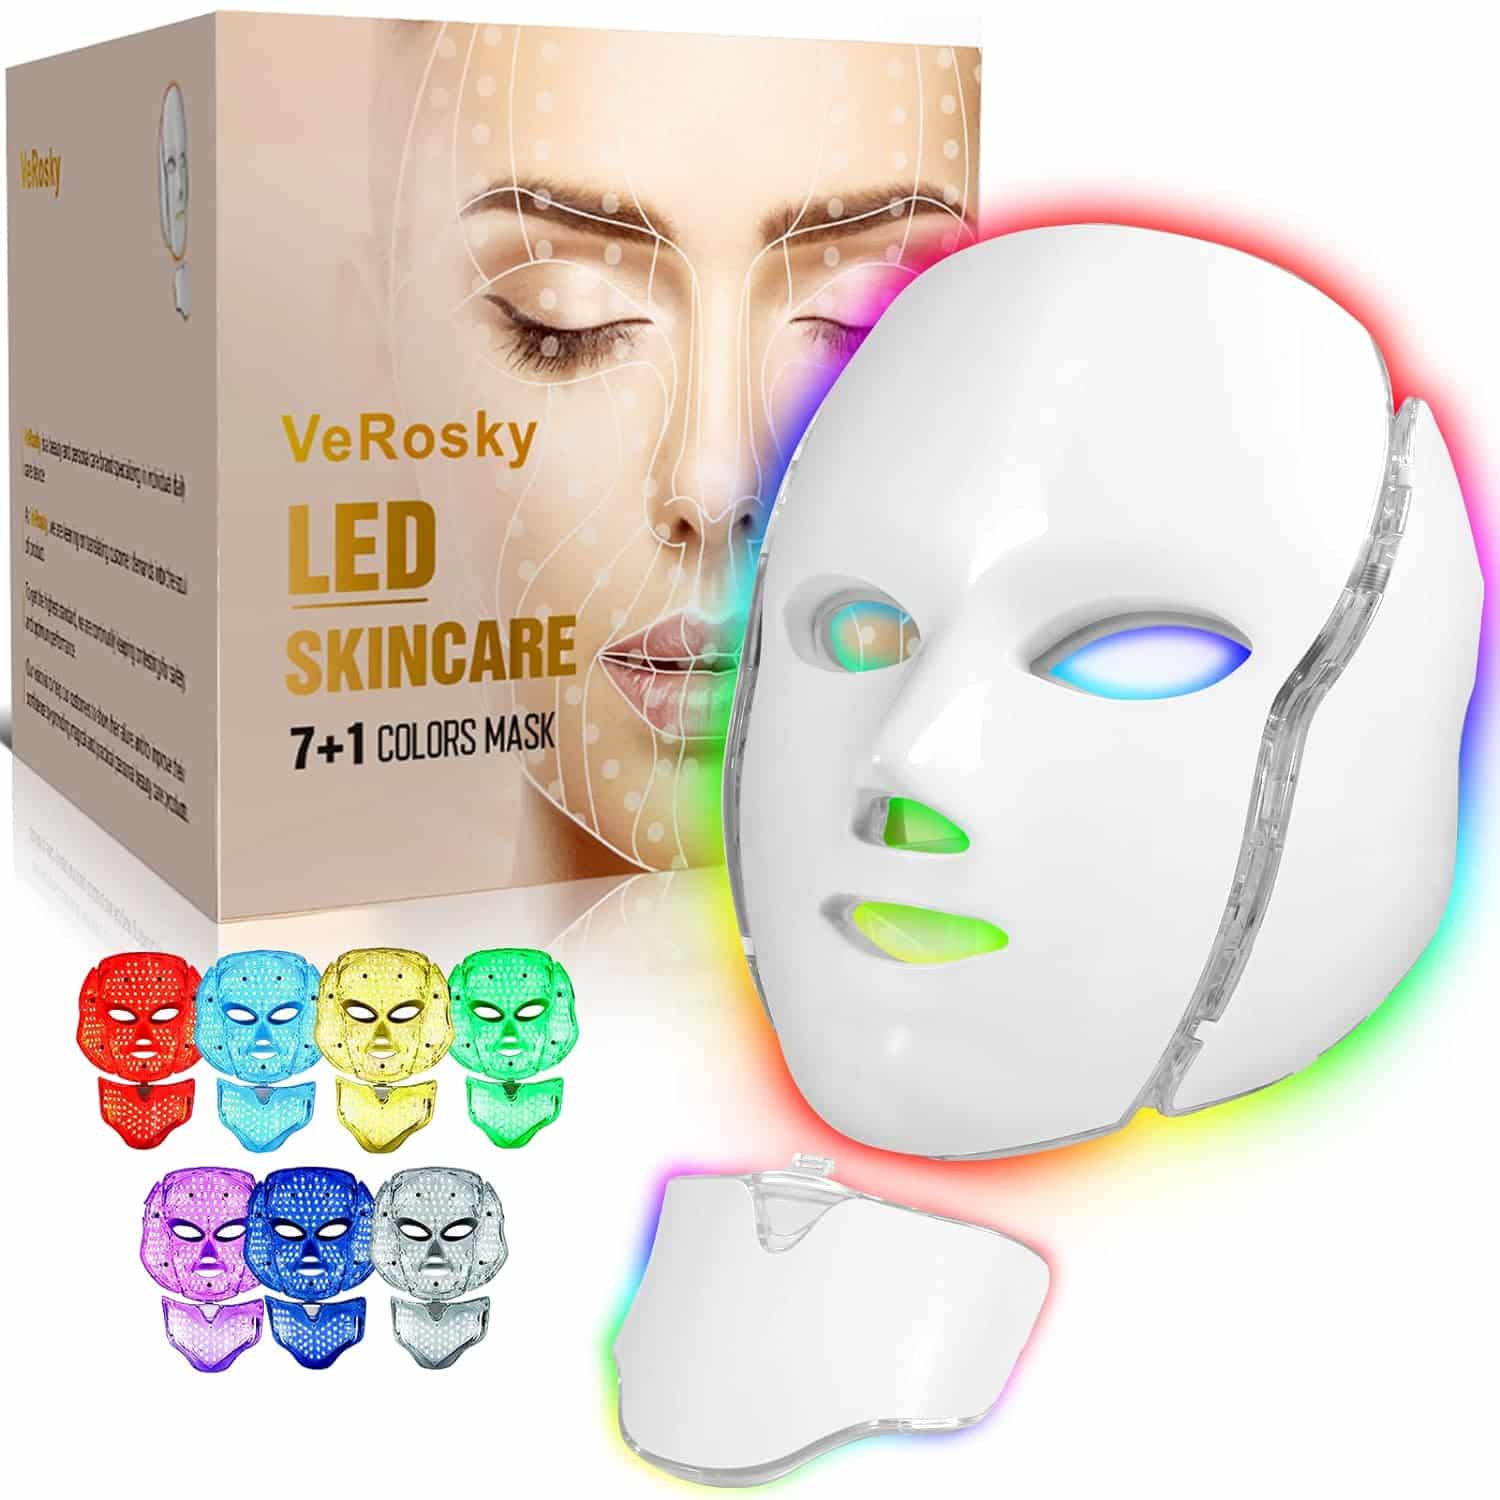 VeRosky Led Face Mask Light Therapy, Red Light Therapy for Face, 7-1 Colors LED Facial Skin Care Mask